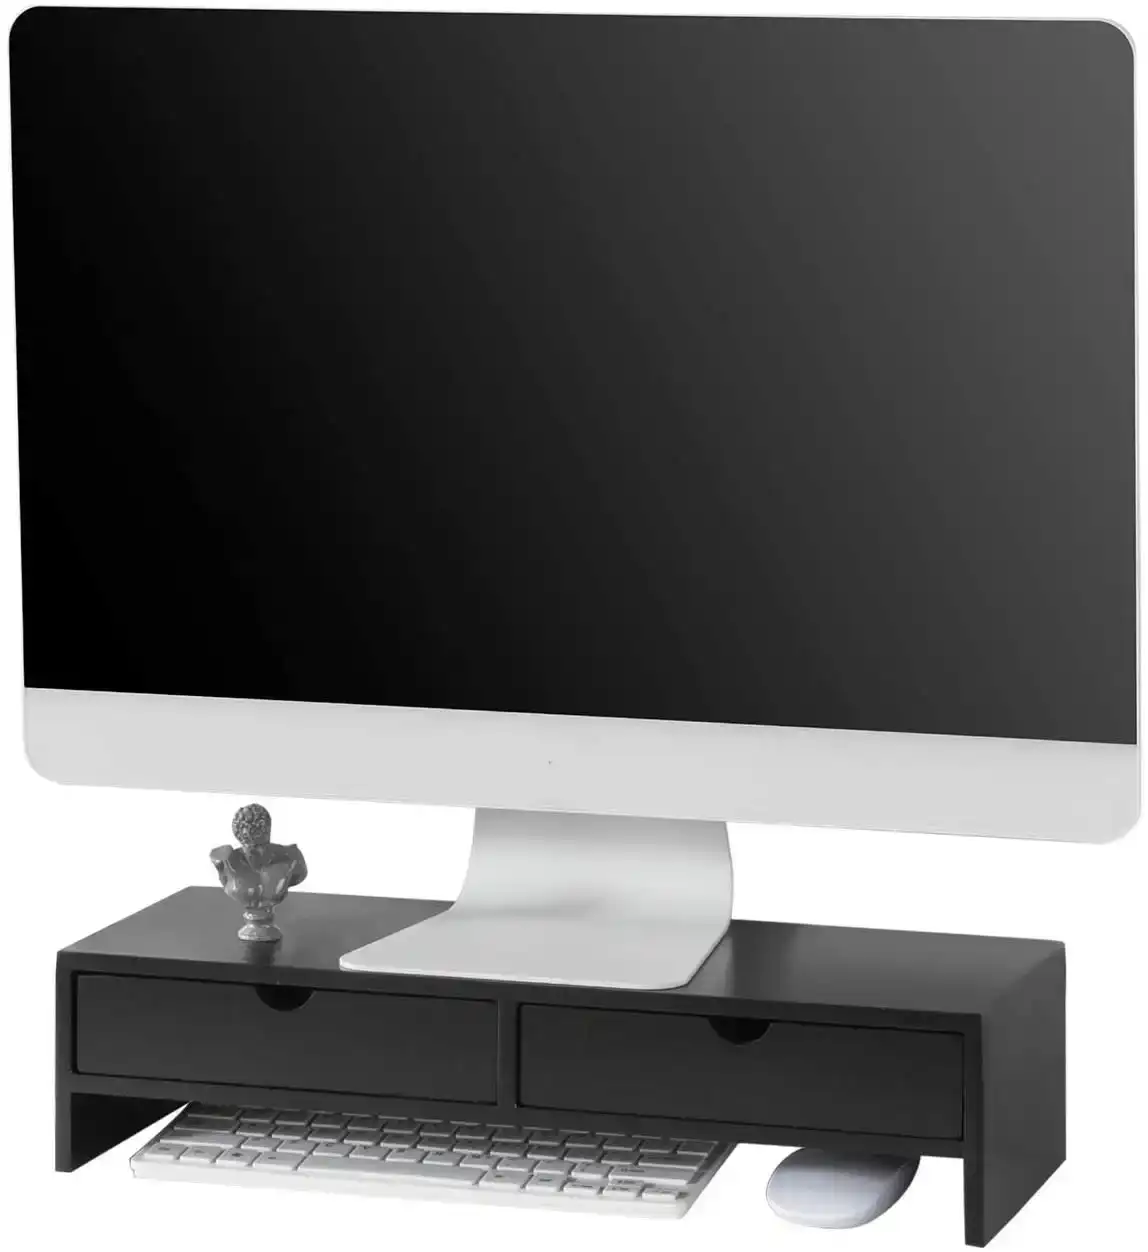 Black Monitor Stand Desk Organizer With 2 Drawers - One Size